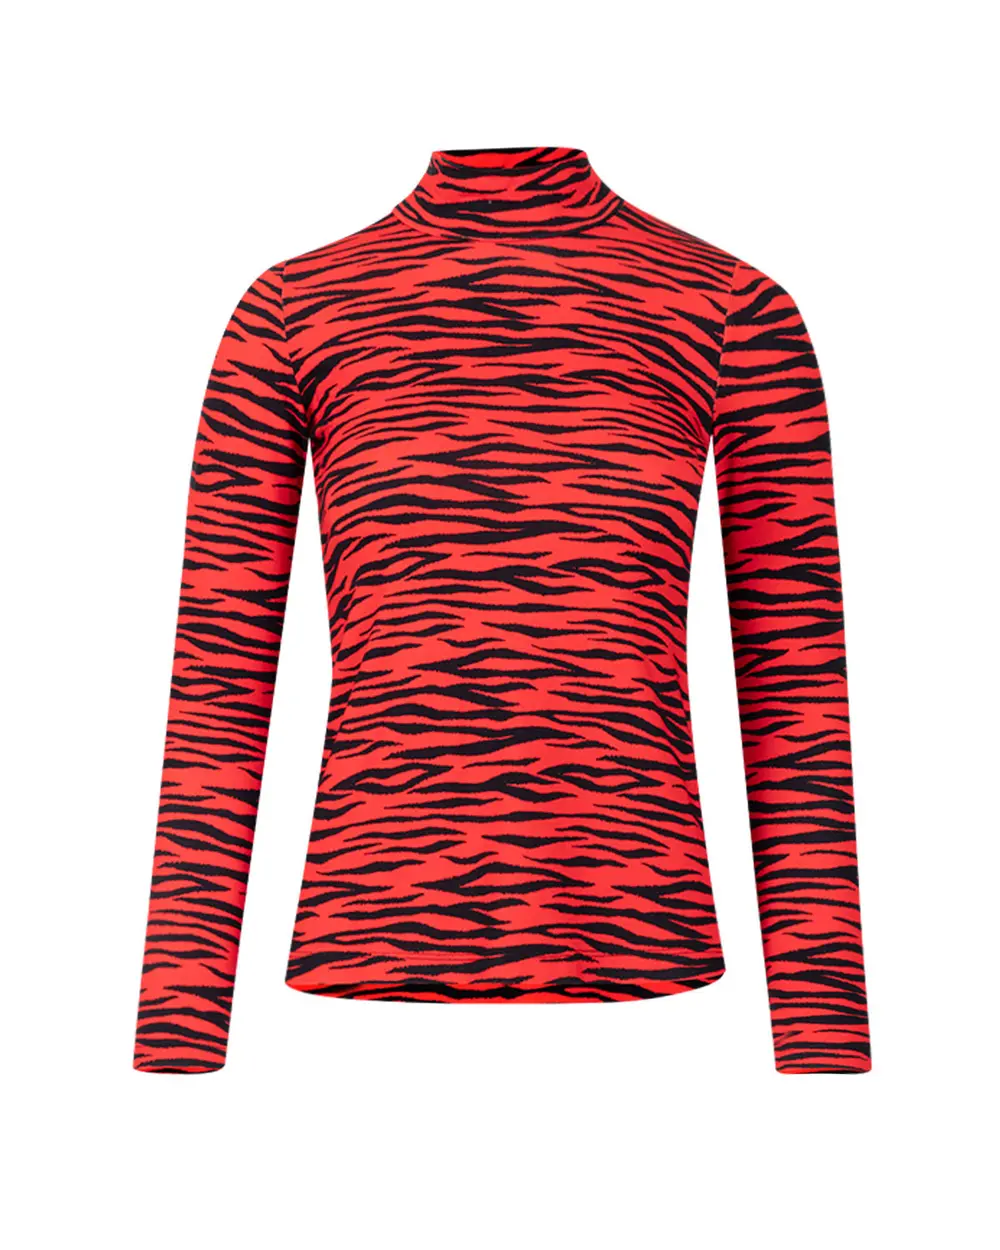 Zebra Patterned Knitted Fabric Blouse